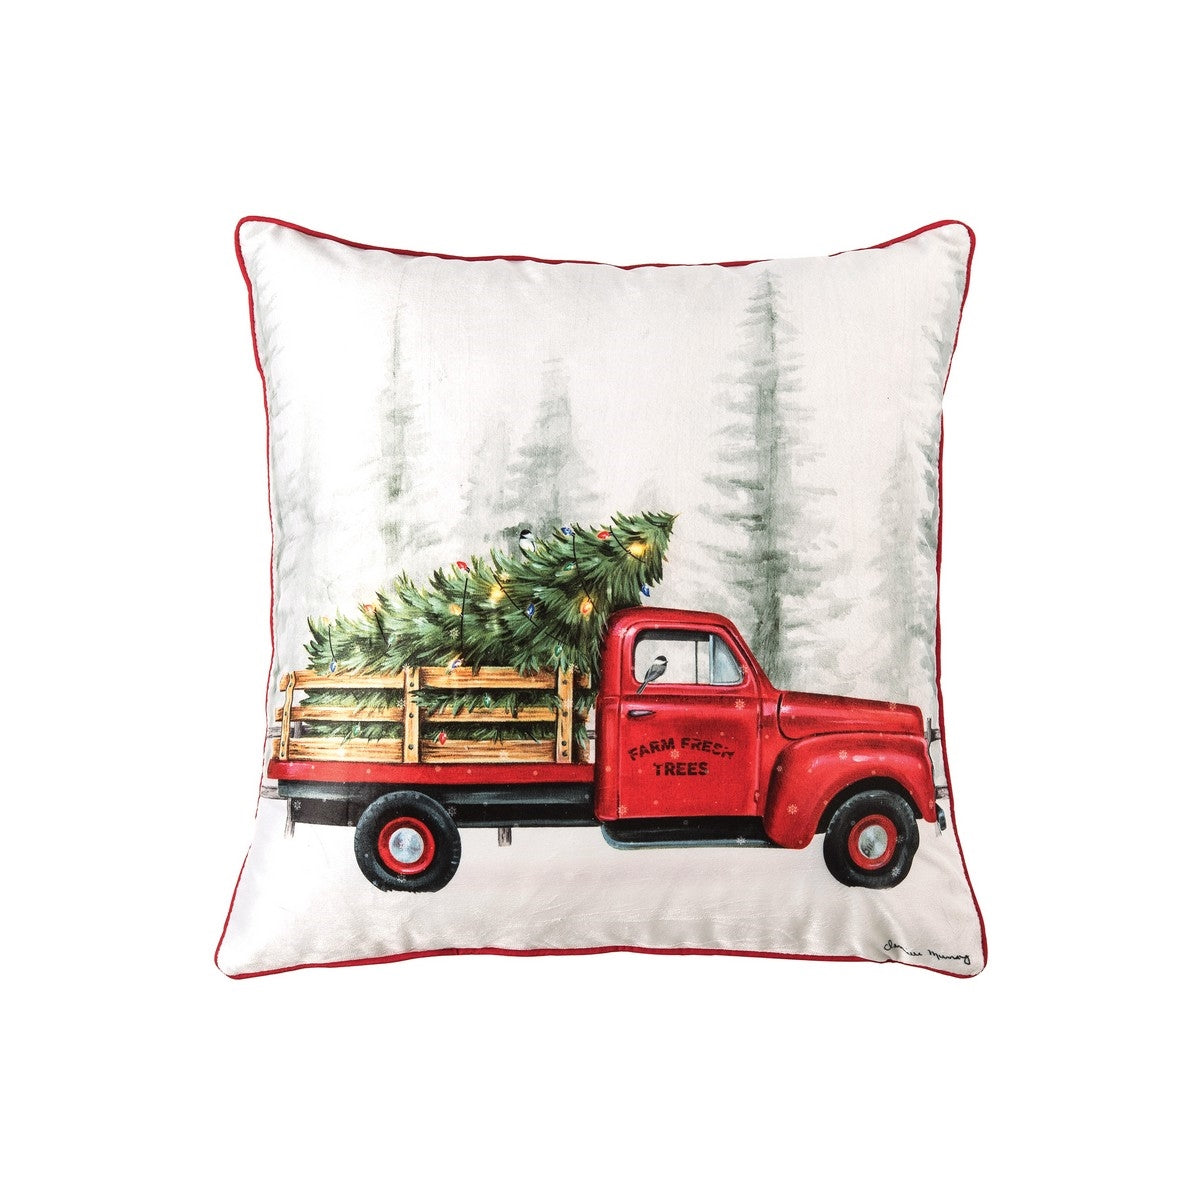 Farm Fresh Trees Red Truck - 18x18 Lighted Pillow    